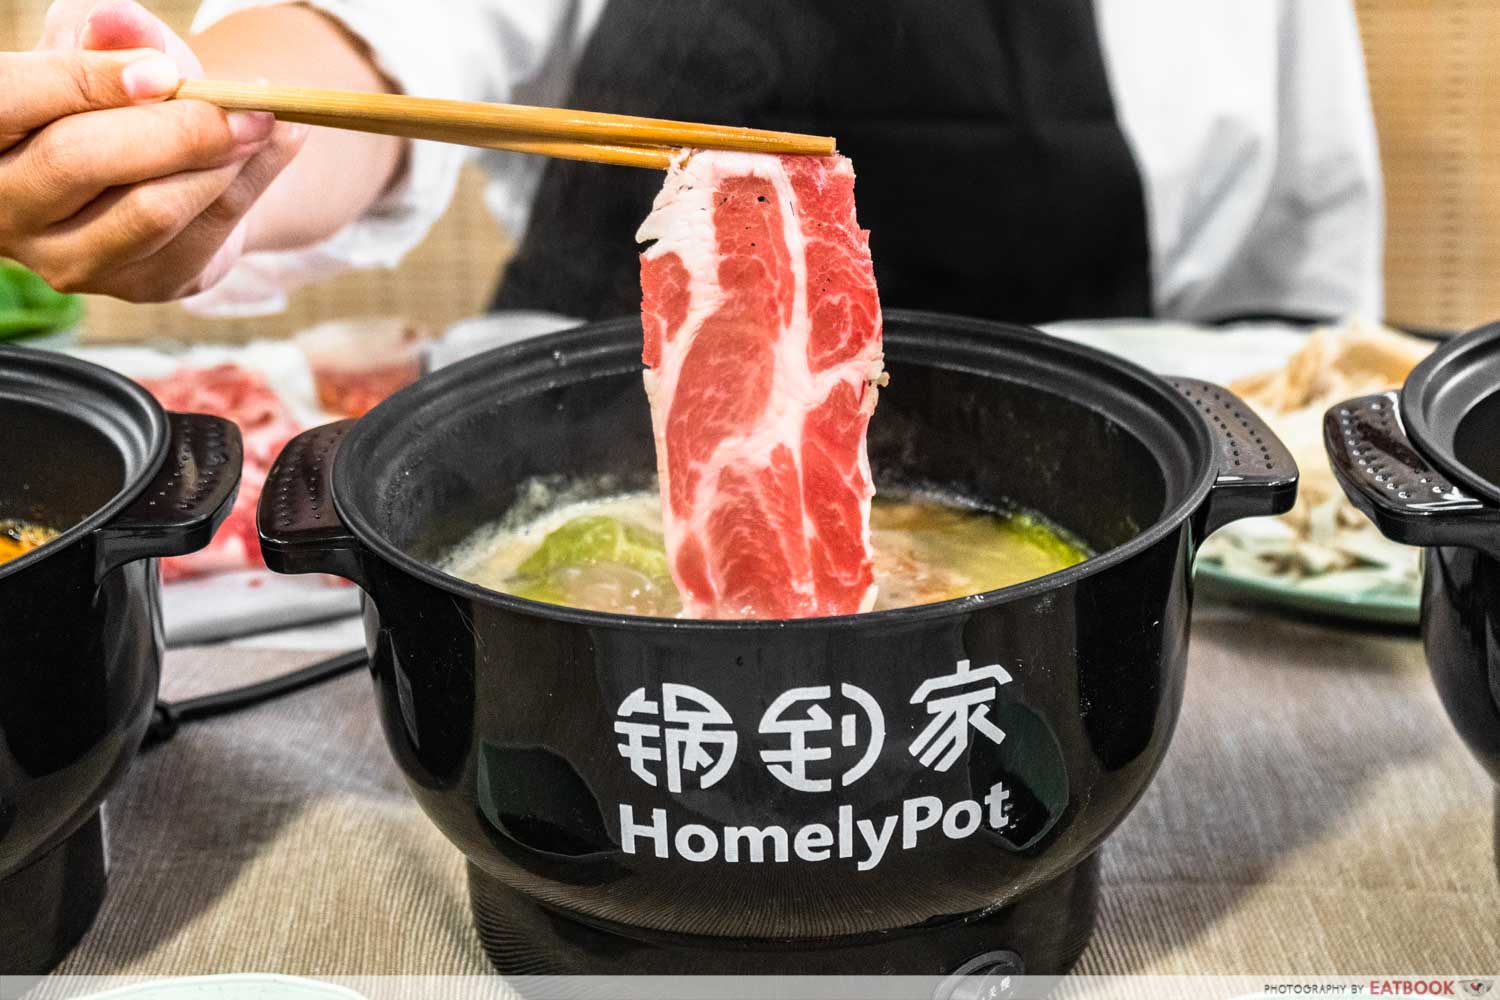 homelypot - dipping meat